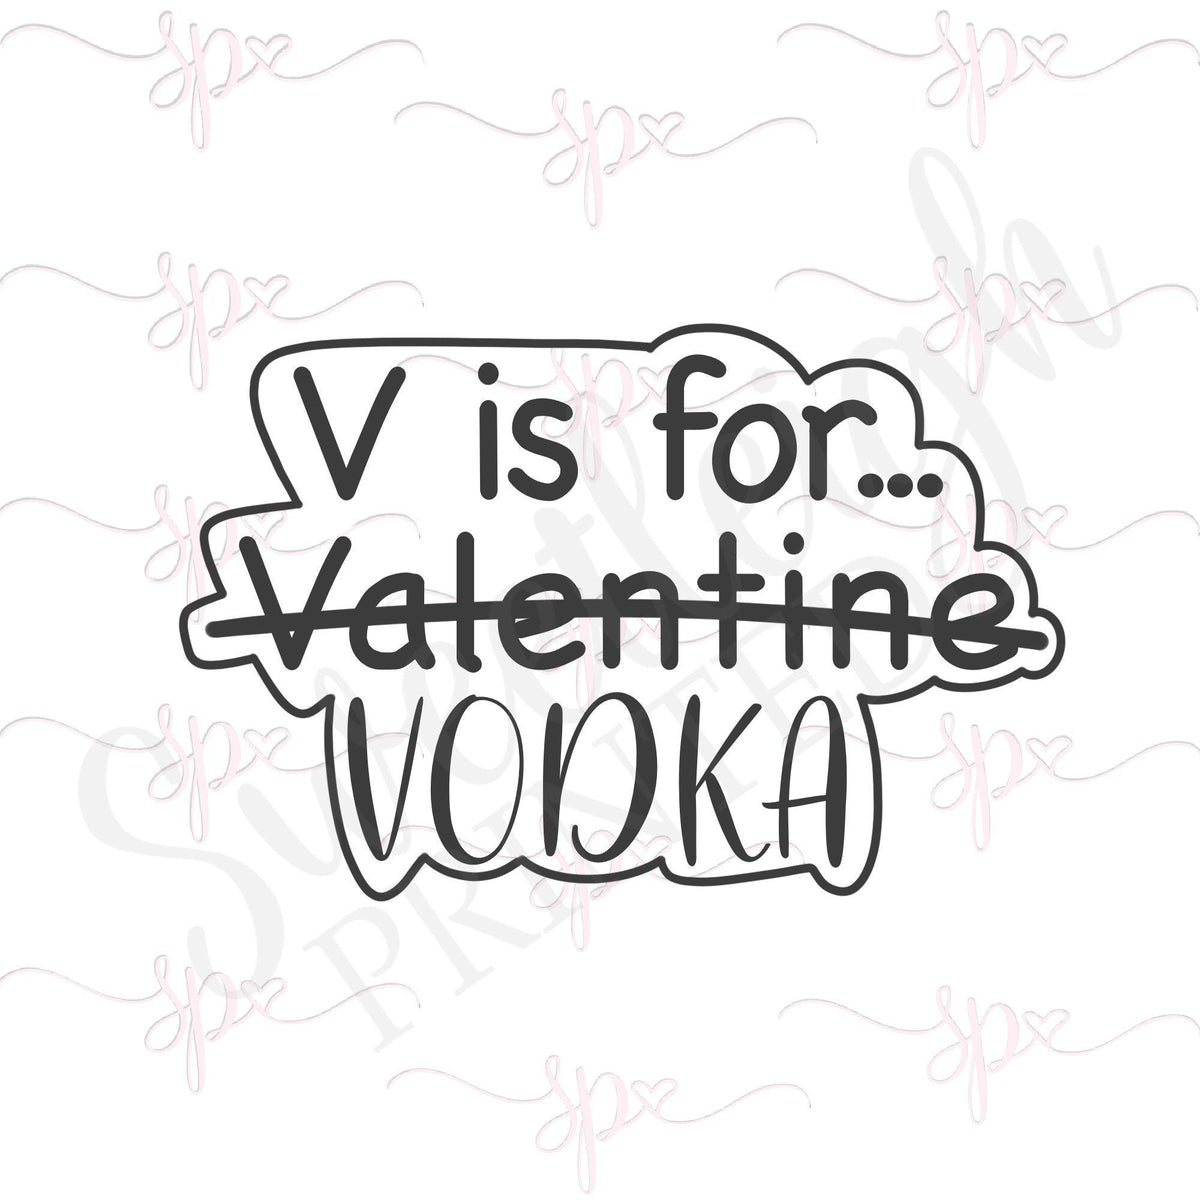 Hand Lettered V is for Vodka Cookie Cutter - Sweetleigh 